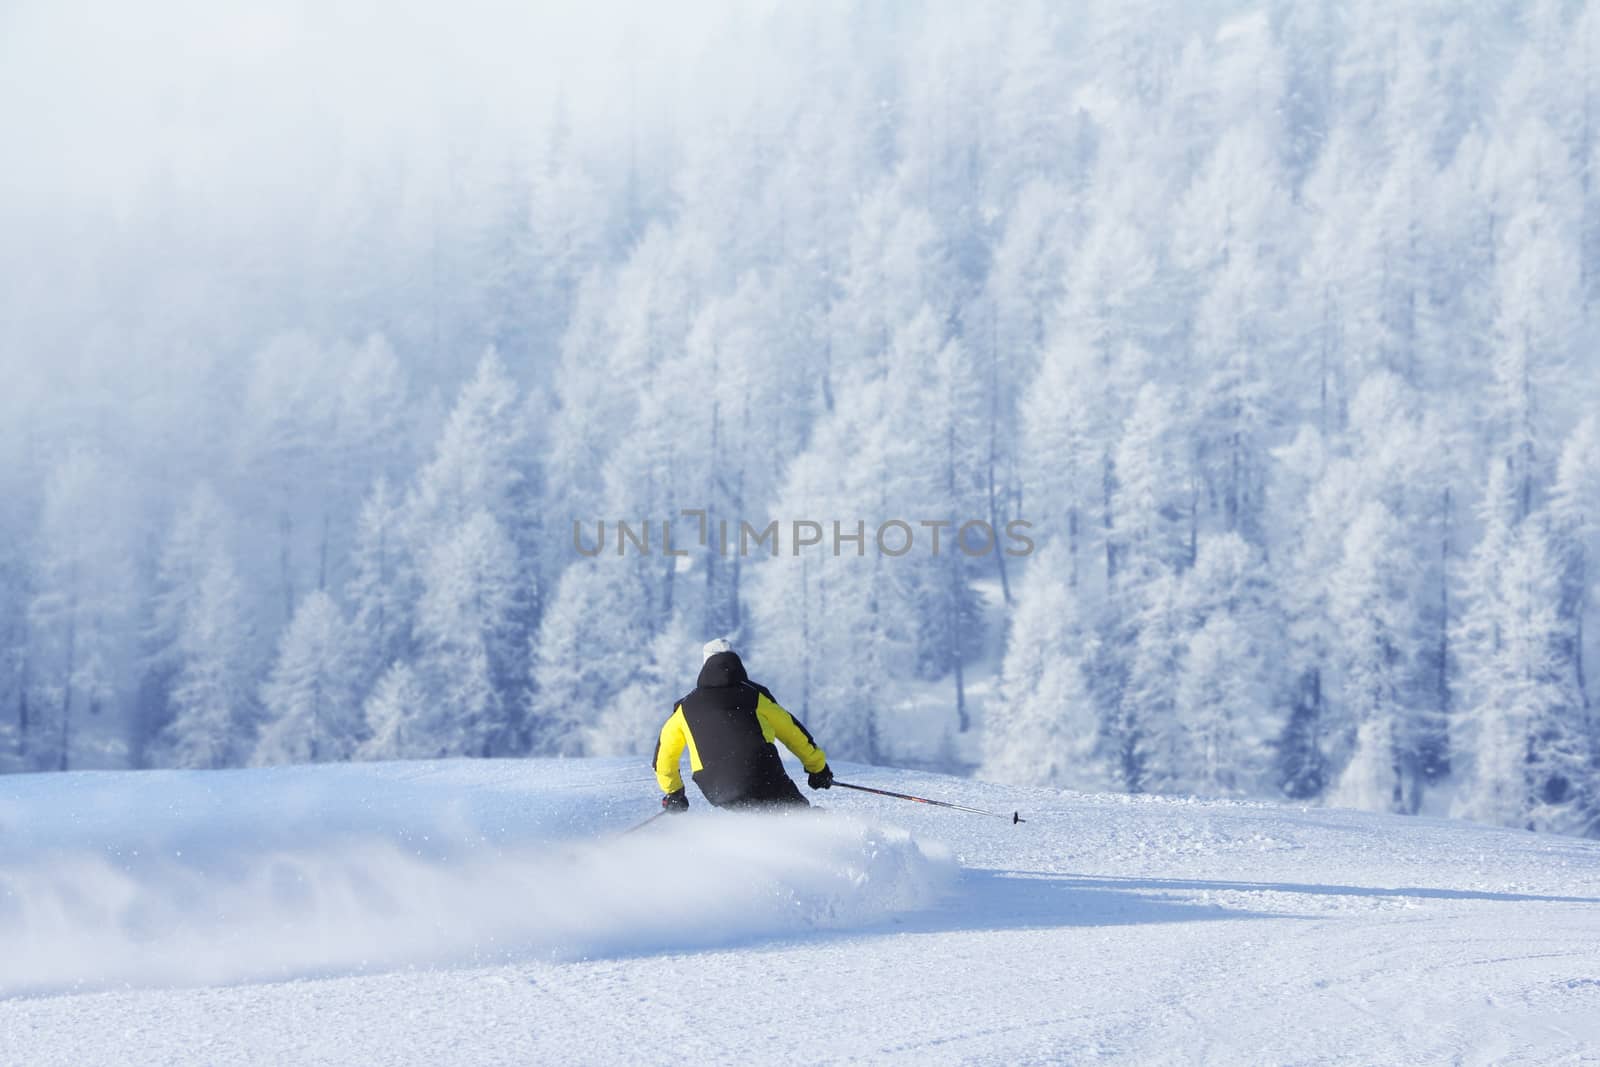 Skier skiing downhill in high mountains, rear view, Solden, Austria